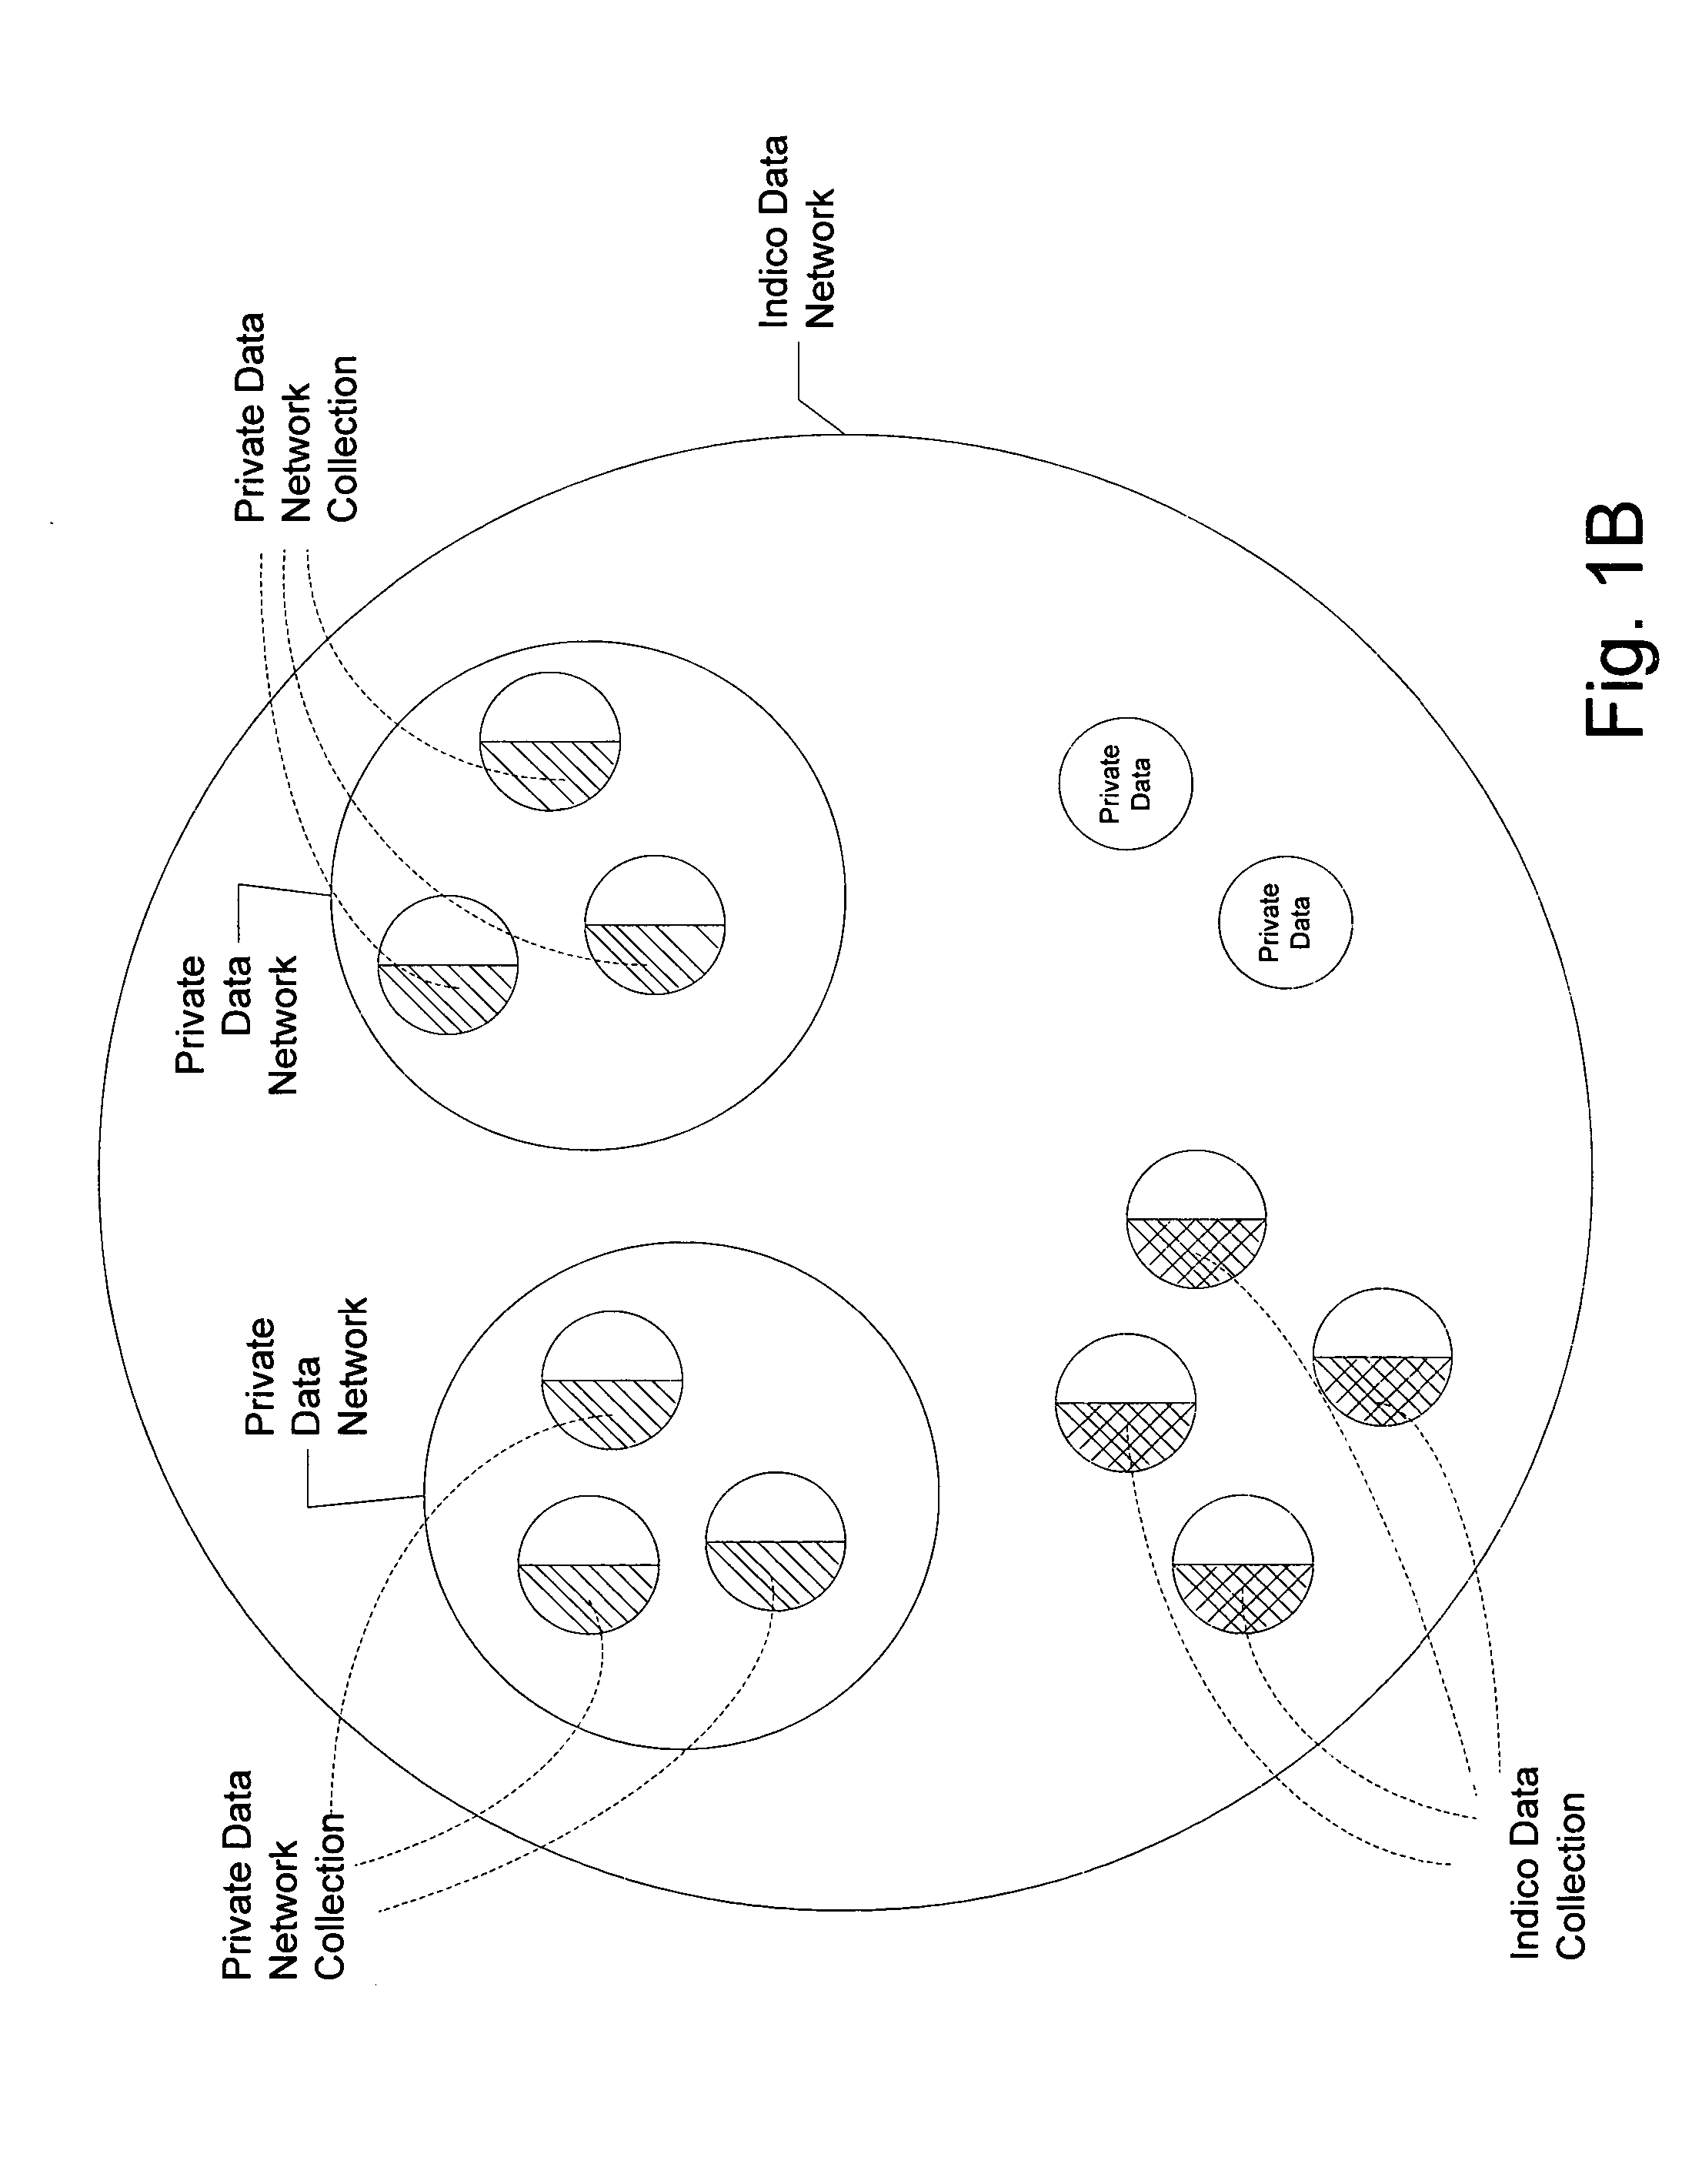 Method of and system for obtaining data from multiple sources and ranking documents based on meta data obtained through collaborative filtering and other matching techniques